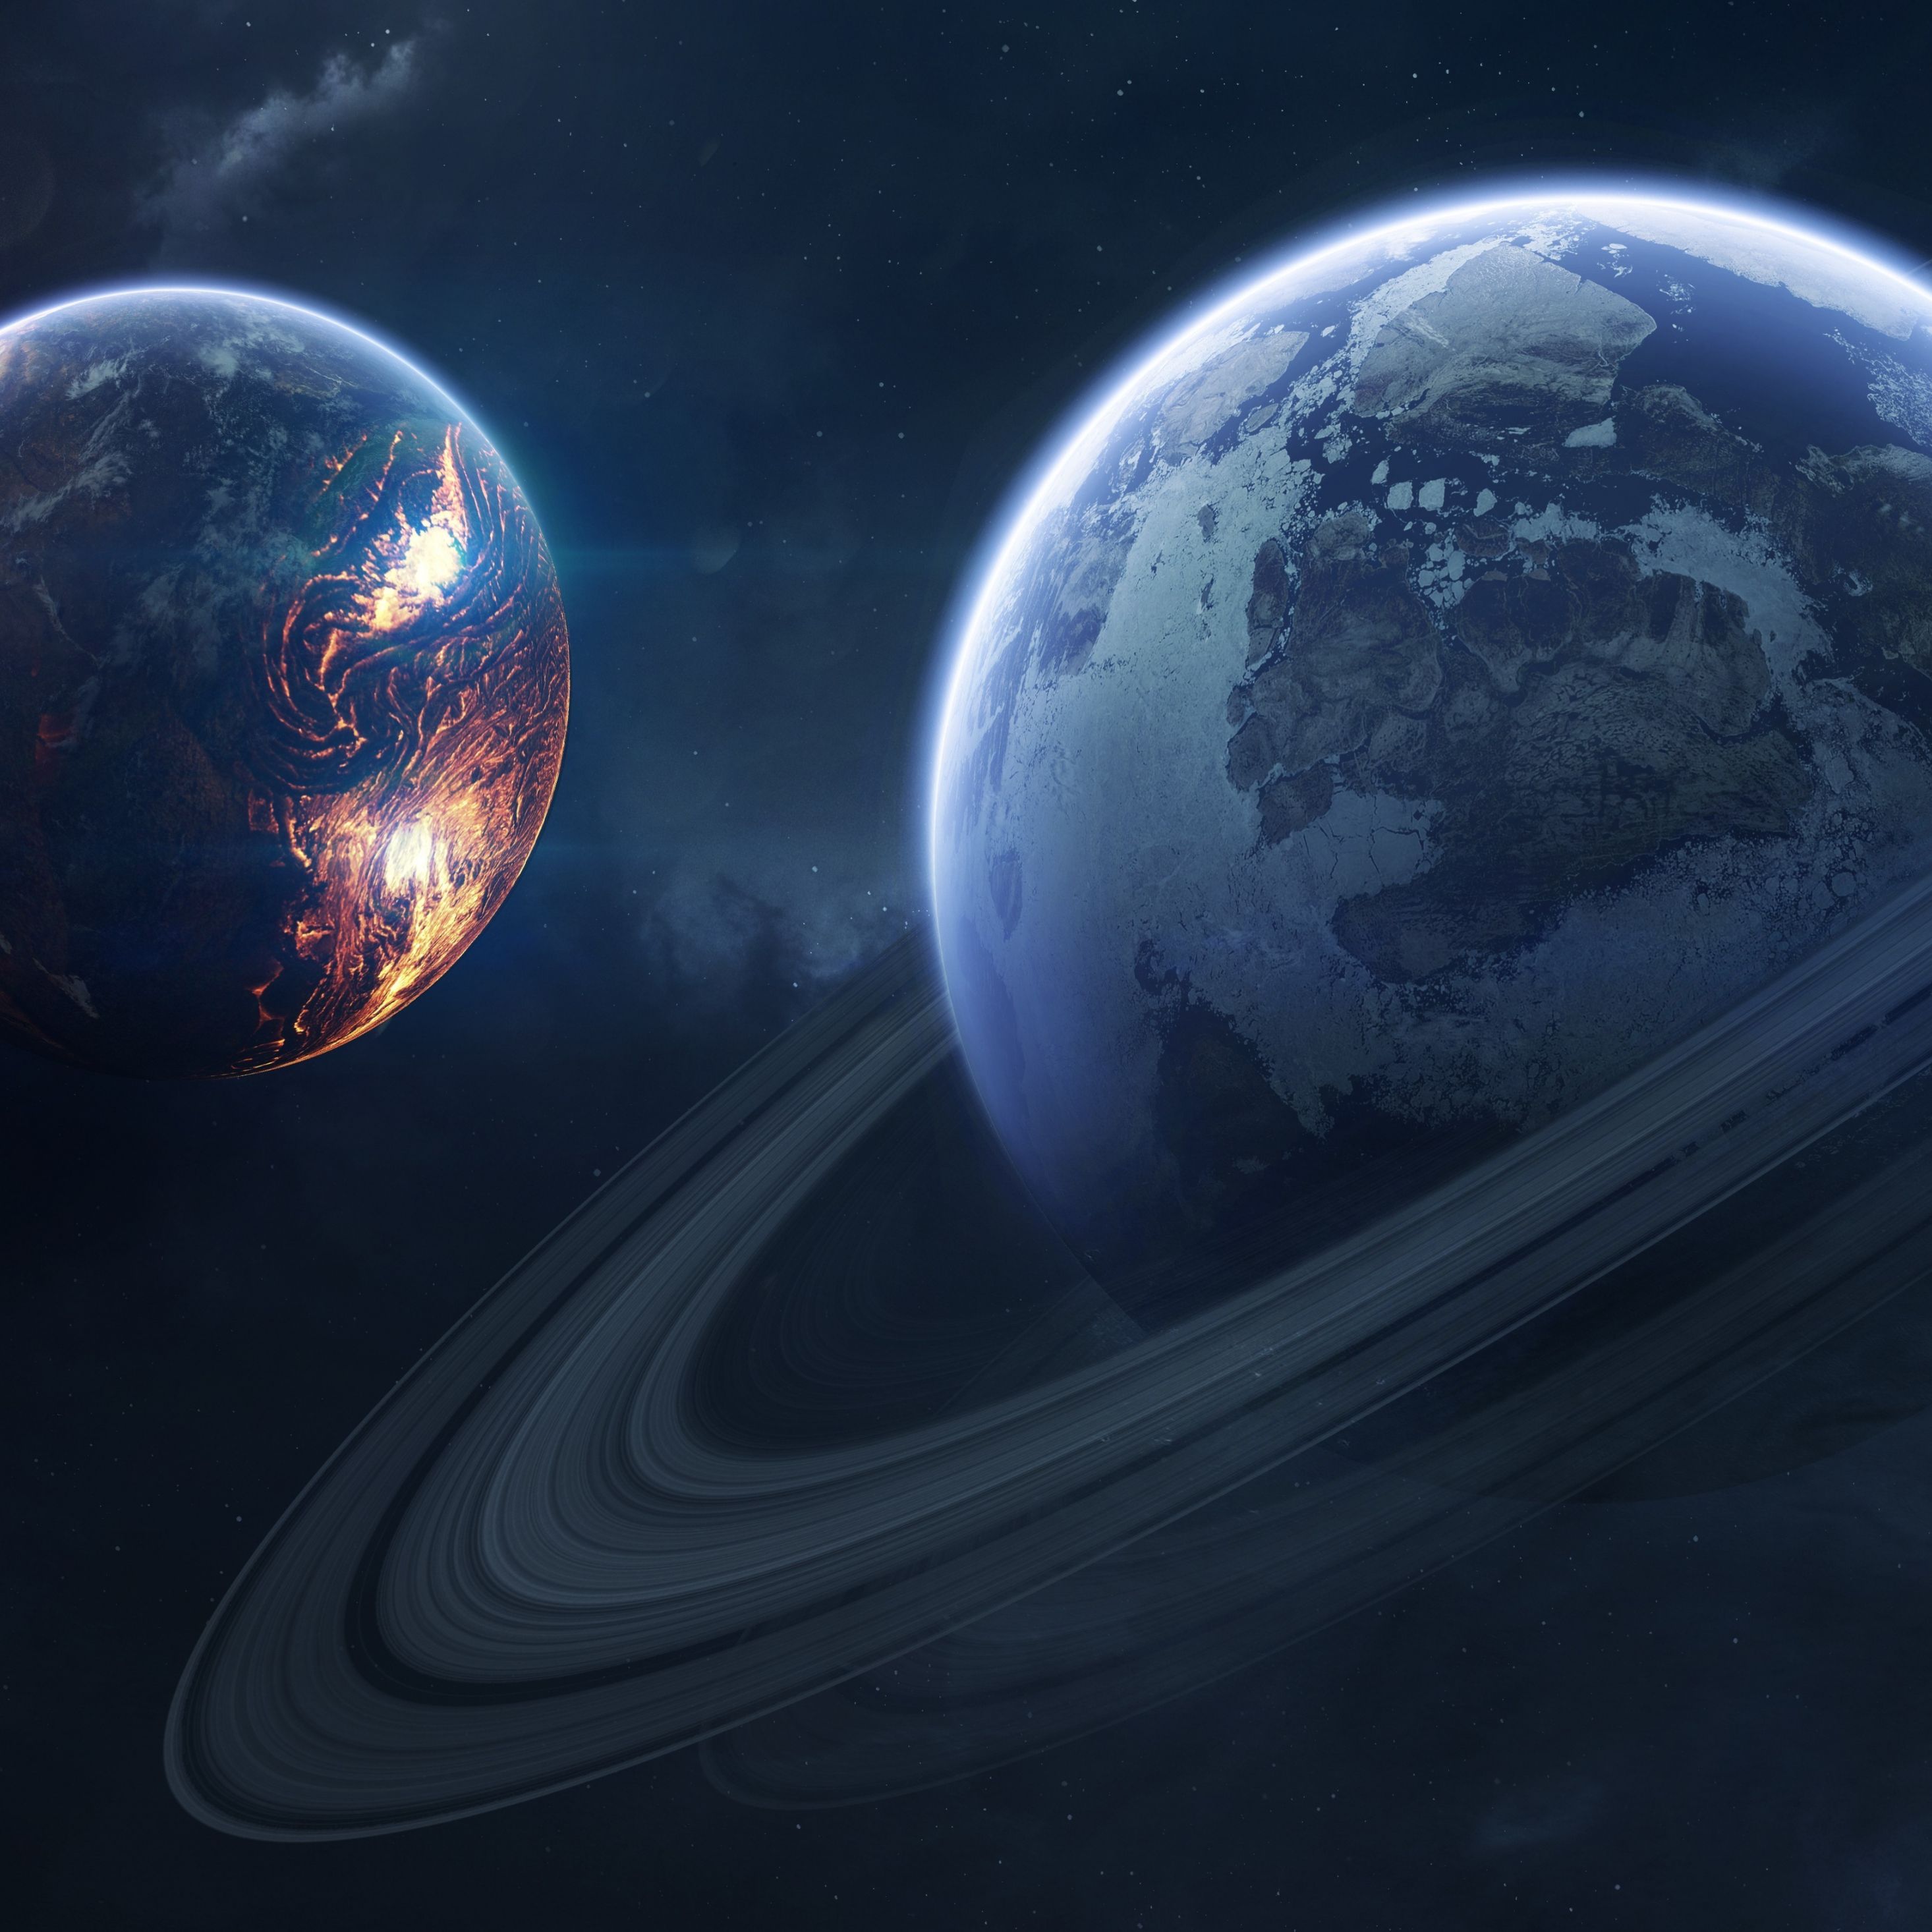 Download 2932x2932 wallpapers saturn, space, planet of rings, ipad